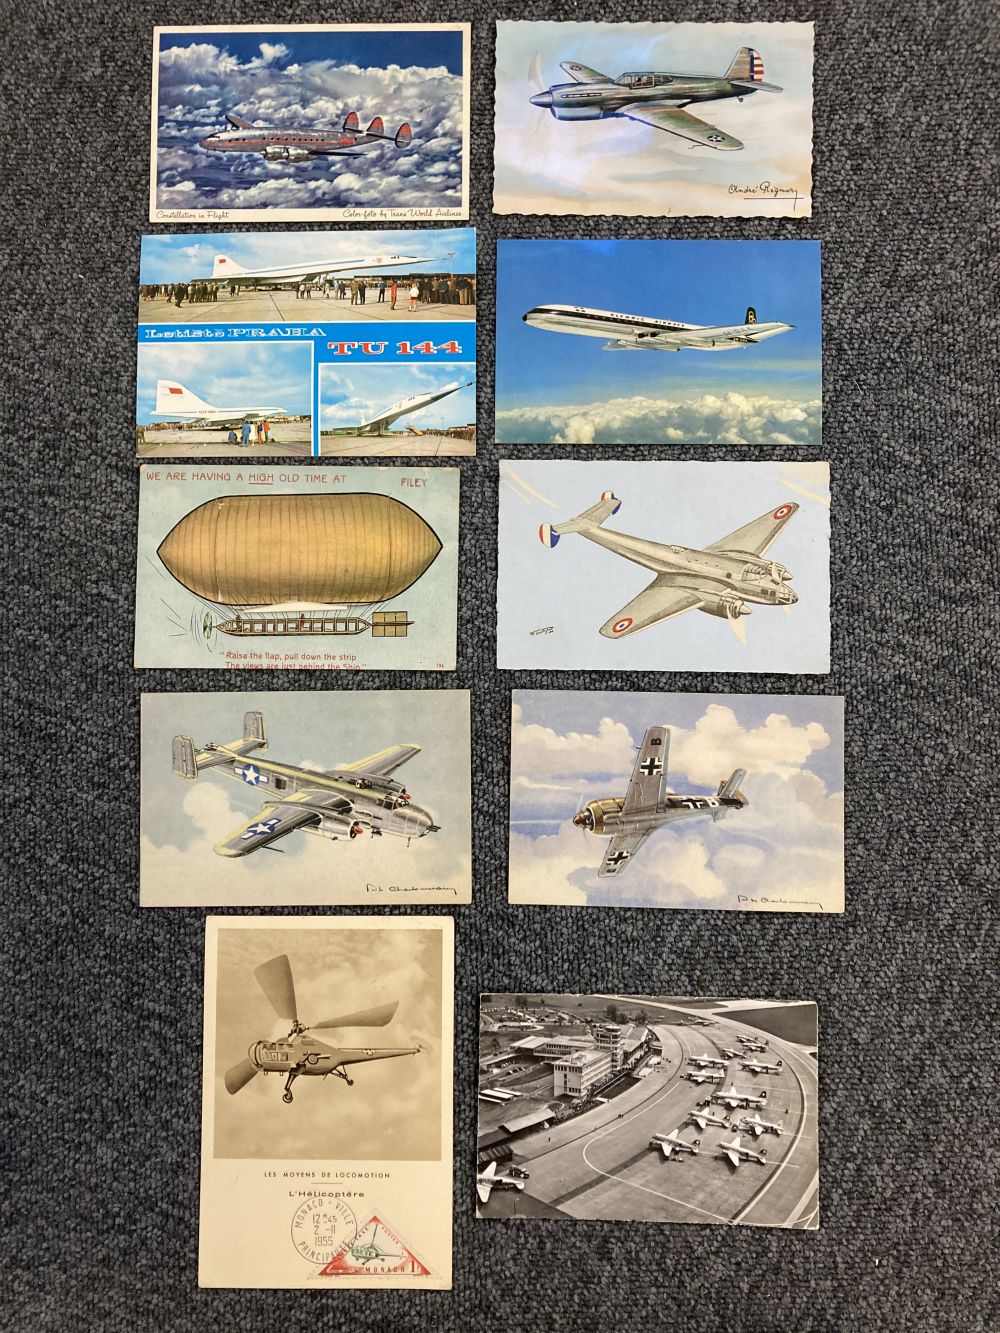 Aviation Postcards. Collection of 196 aviation postcards, 1950/60s